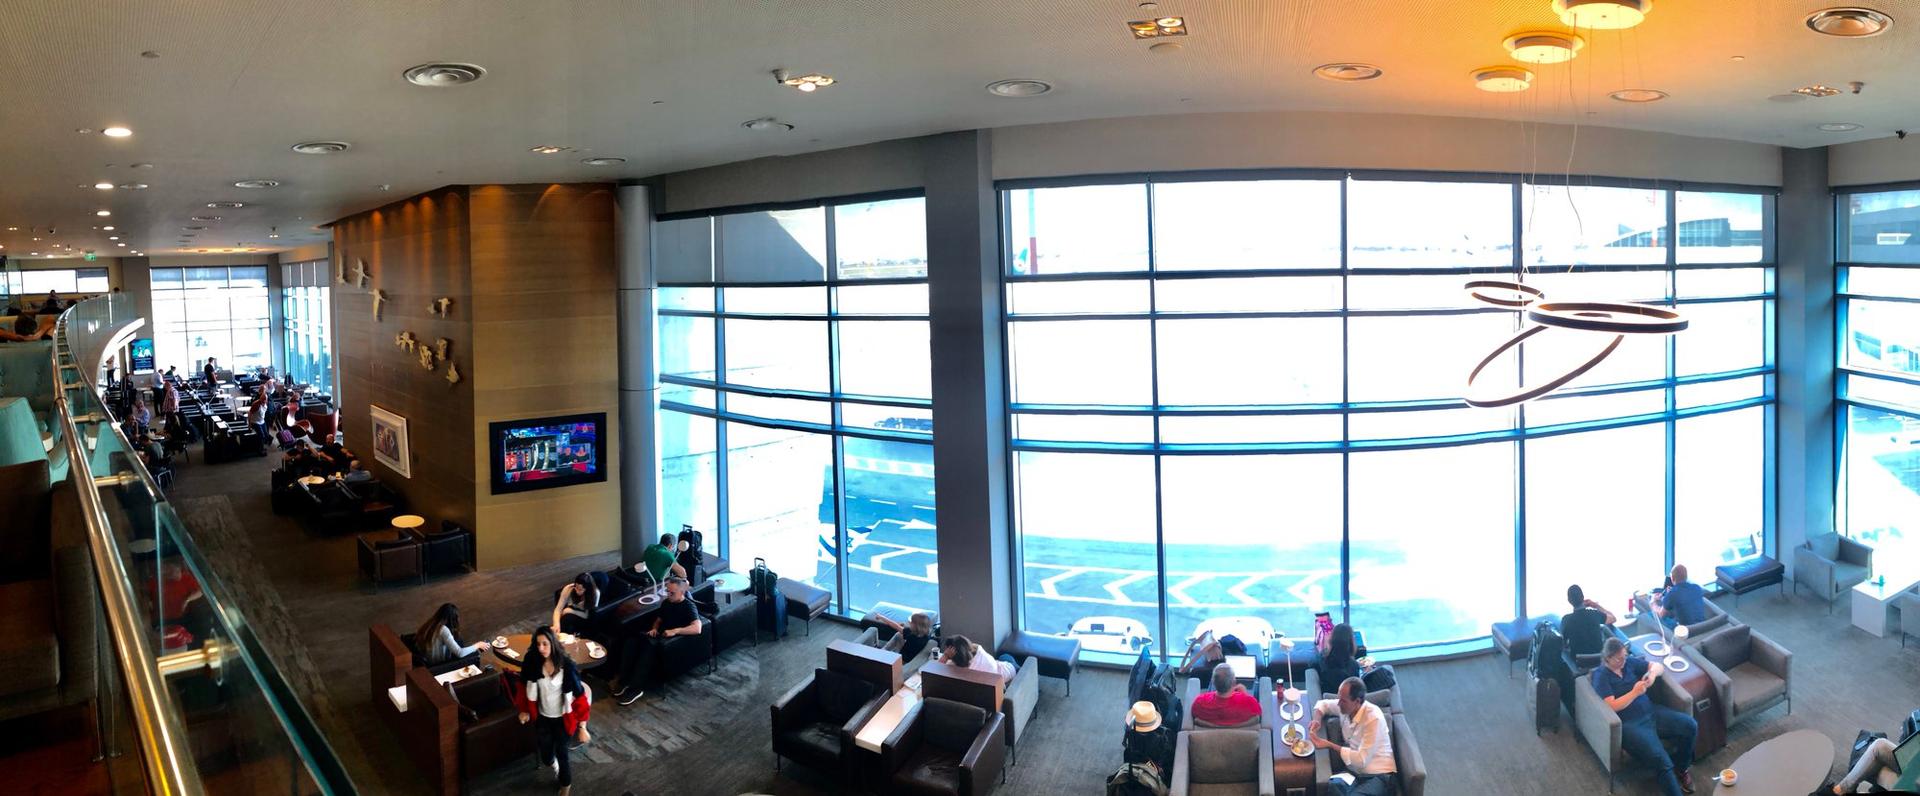 The King David Business Class Lounge image 1 of 8